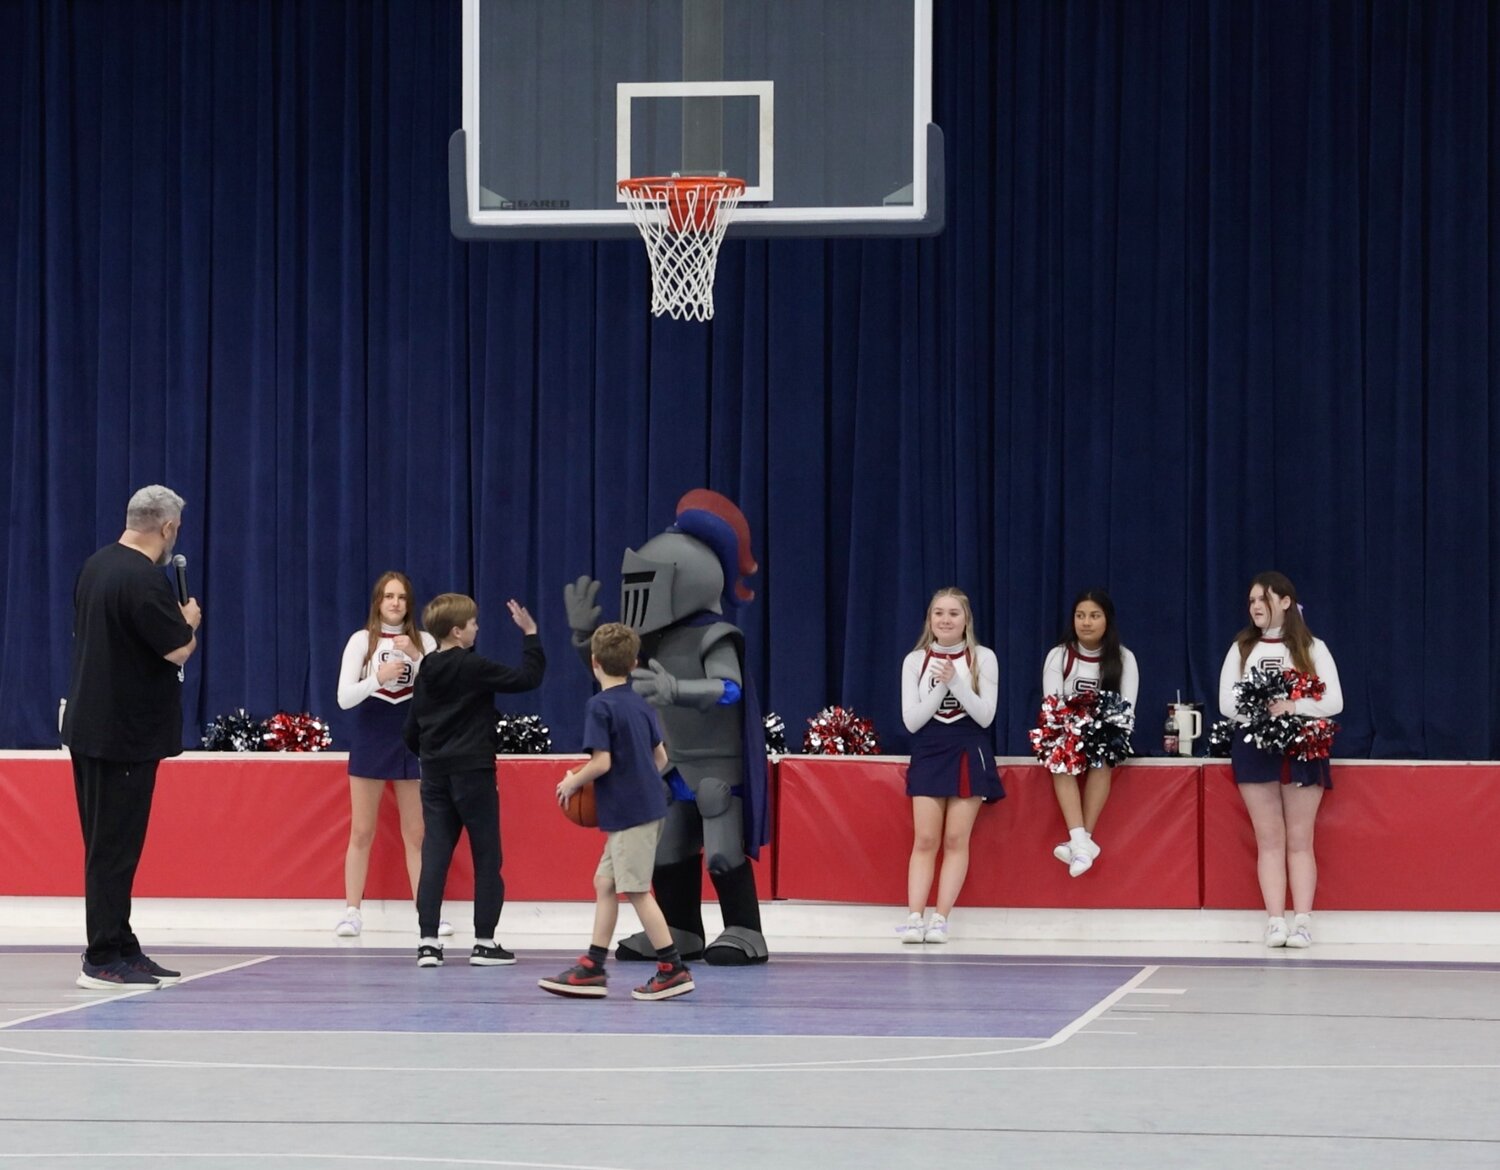 During halftime of the varsity basketball games, shooting contests were held as part of South Baldwin Christian Academy’s Coaches vs. Cancer event on Friday, Jan. 19. The youth shooting challenge winner walked away with their favorite candy.